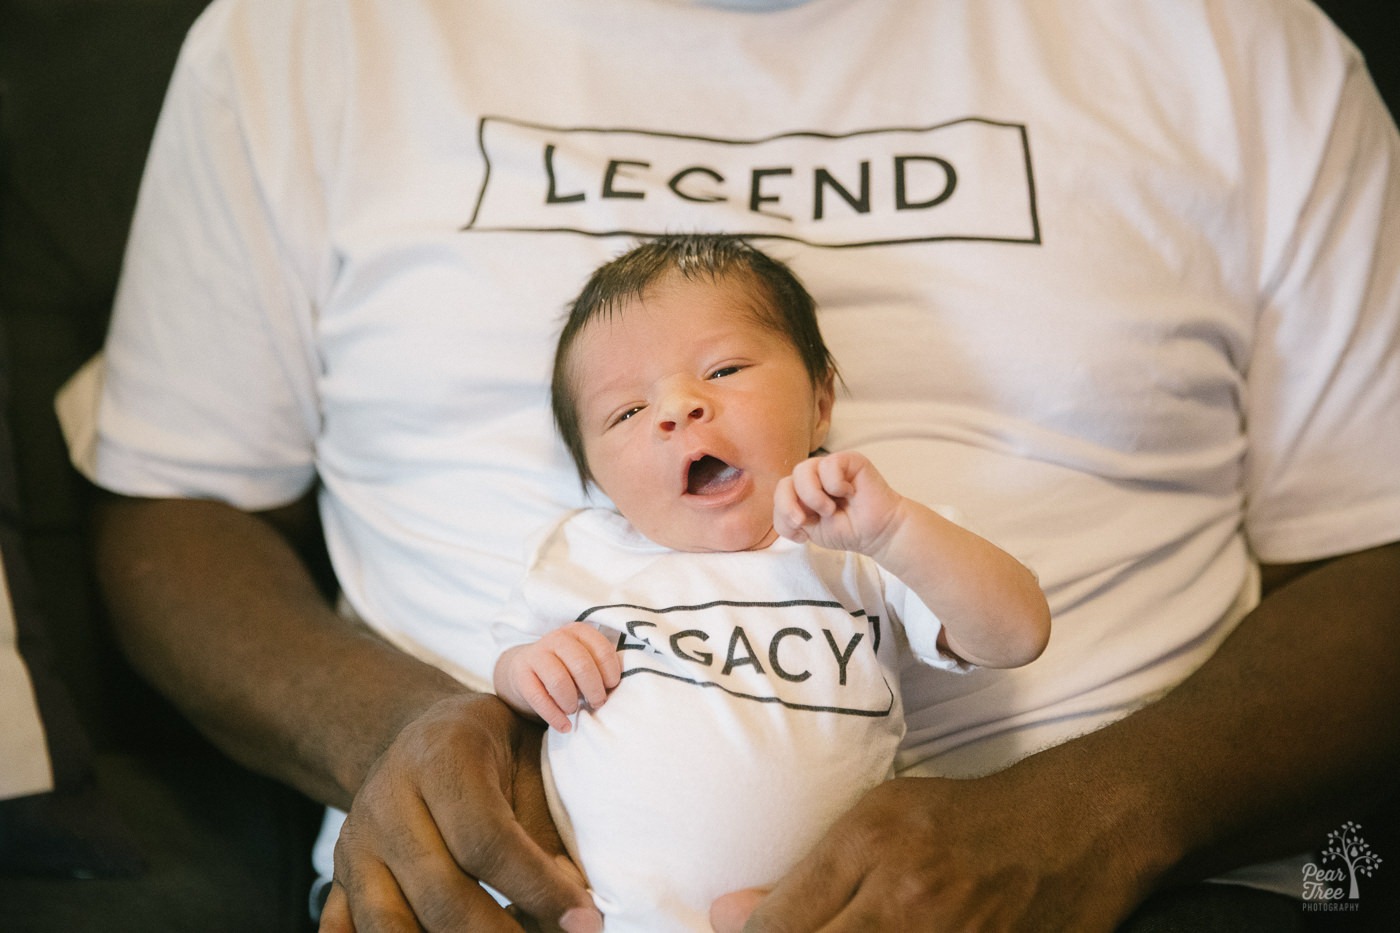 Dad in LEGEND t-shirt holding his five day old son wearing a LEGACY onesie.